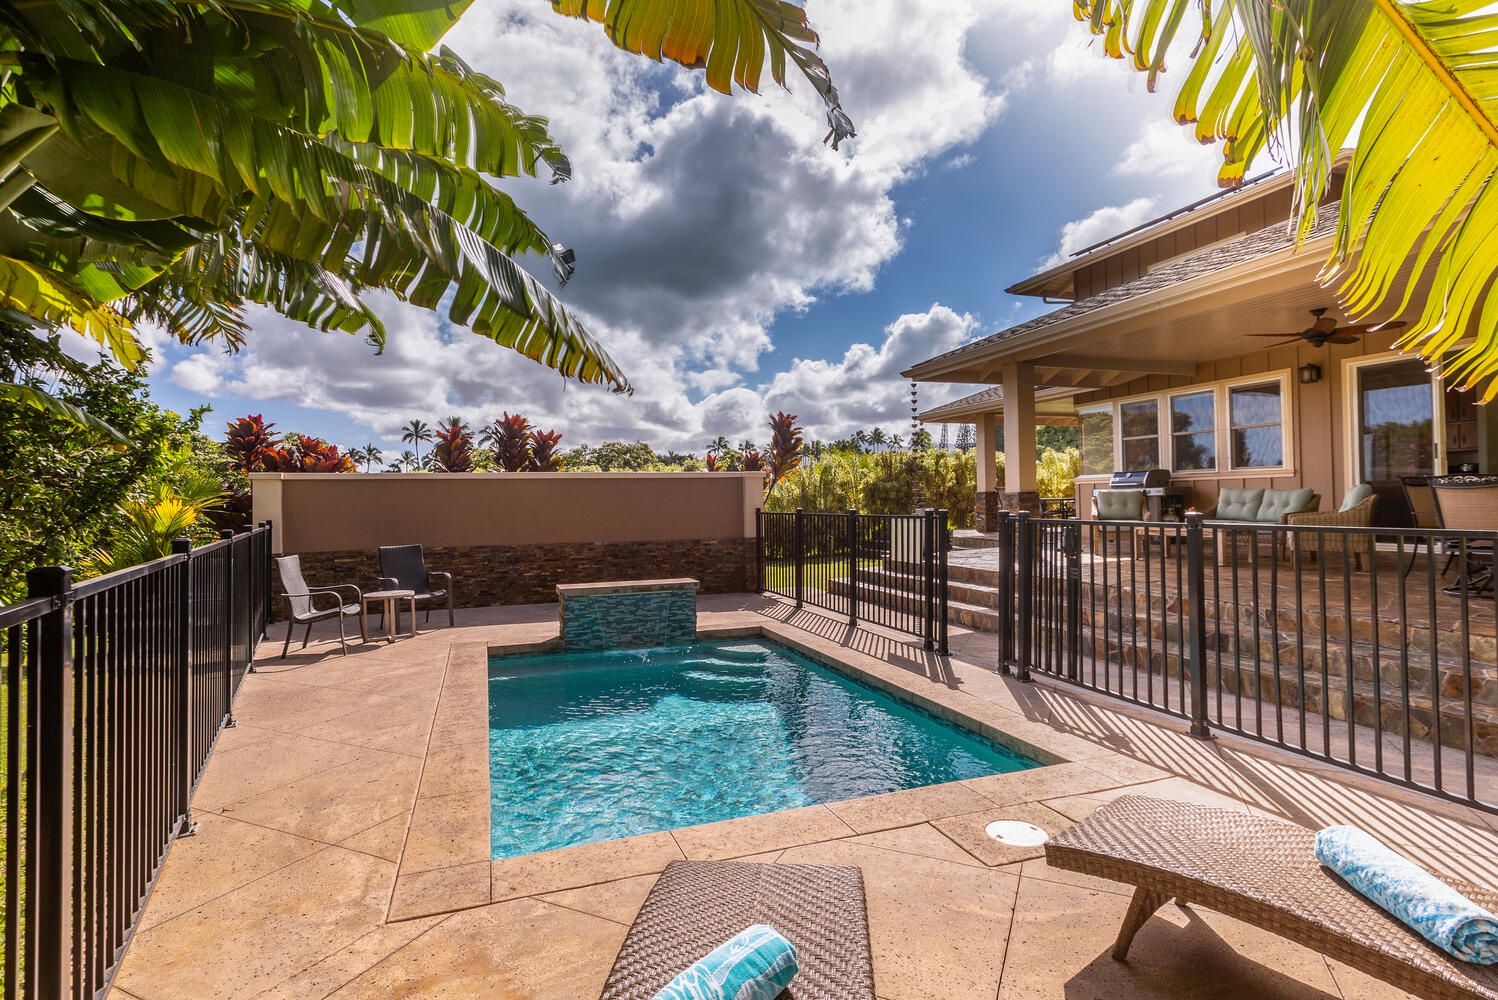 Princeville Vacation Rentals, Pohaku Villa - Every moment with us is a memory to cherish